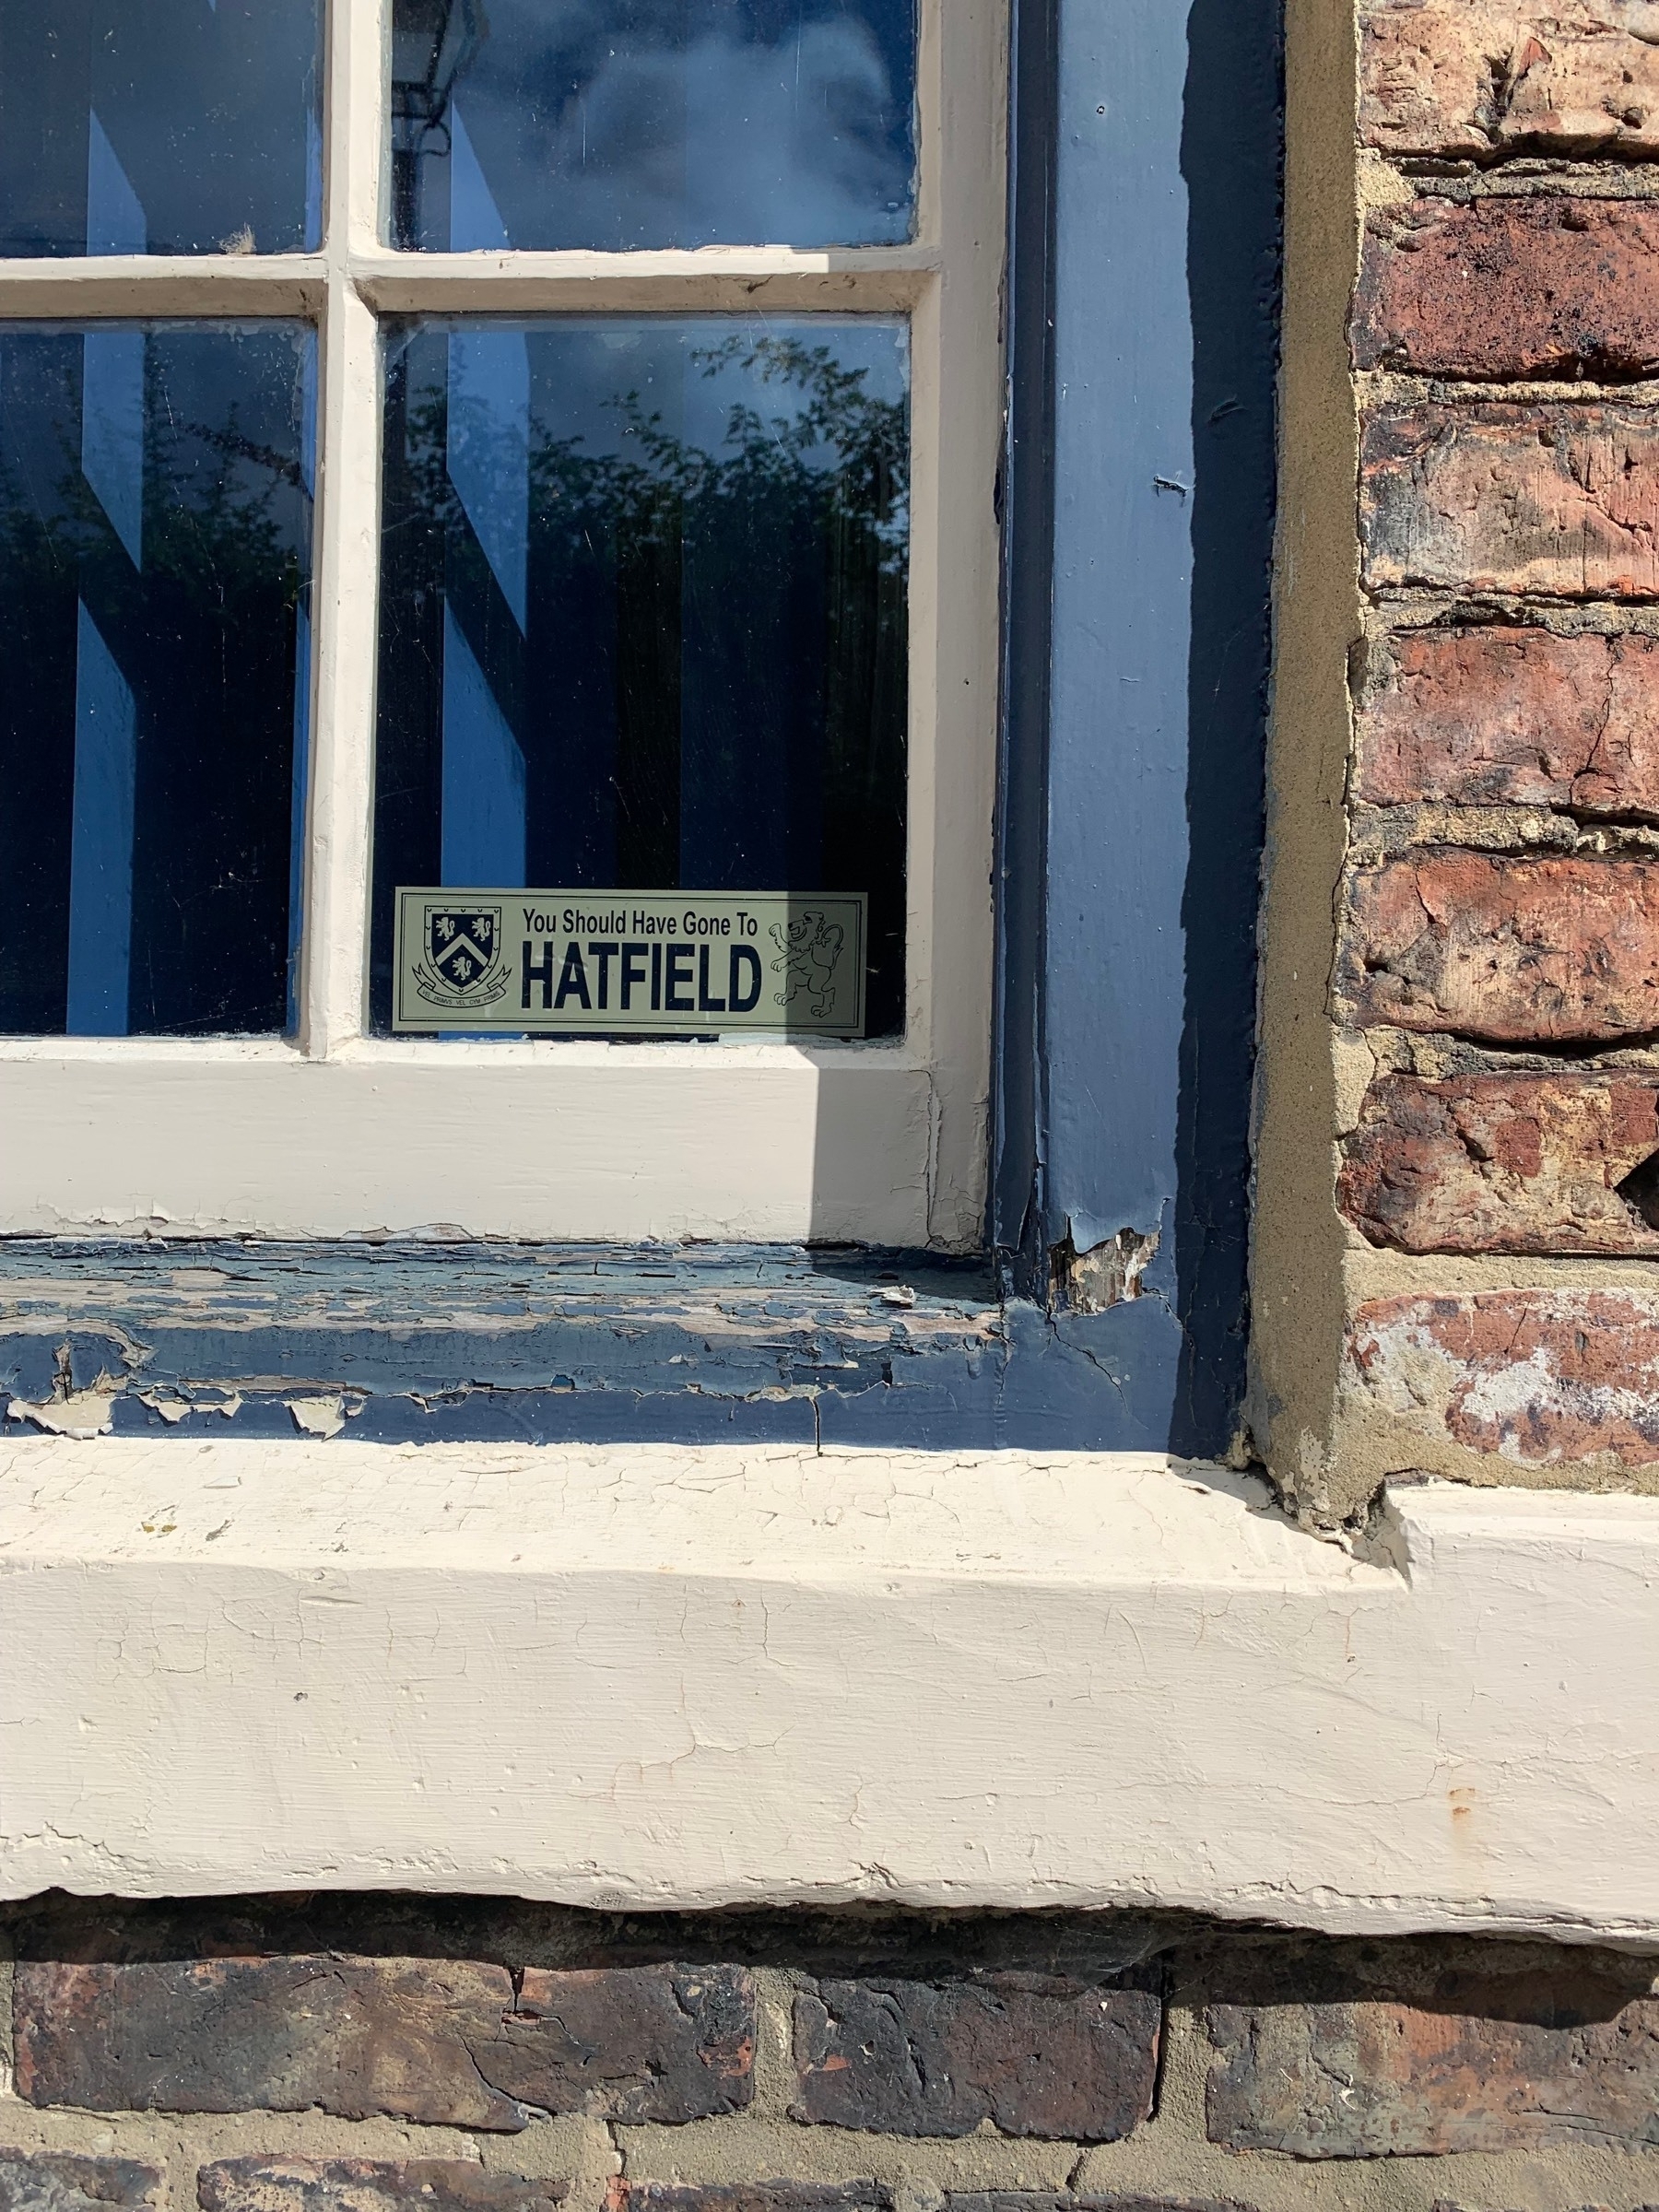 Sign in a window reading 'You Should Have Gone to Hatfield'.